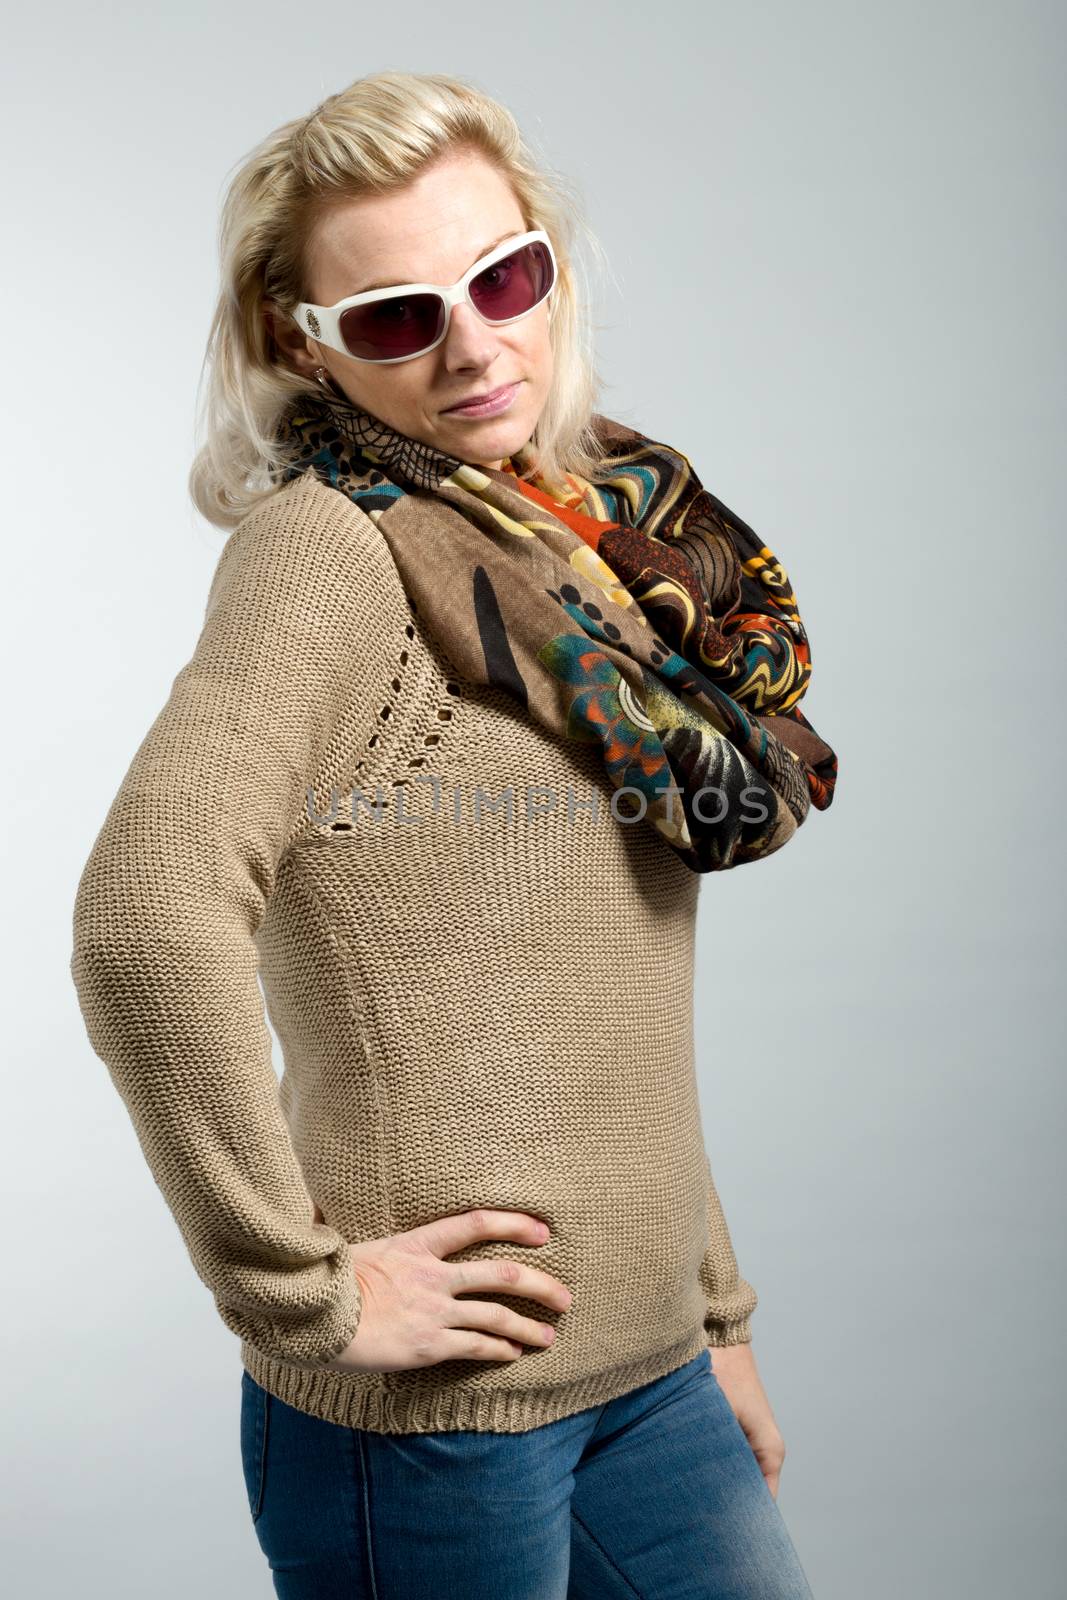 close up studio portrait of beautiful woman with sweater, scarf and sun glasses